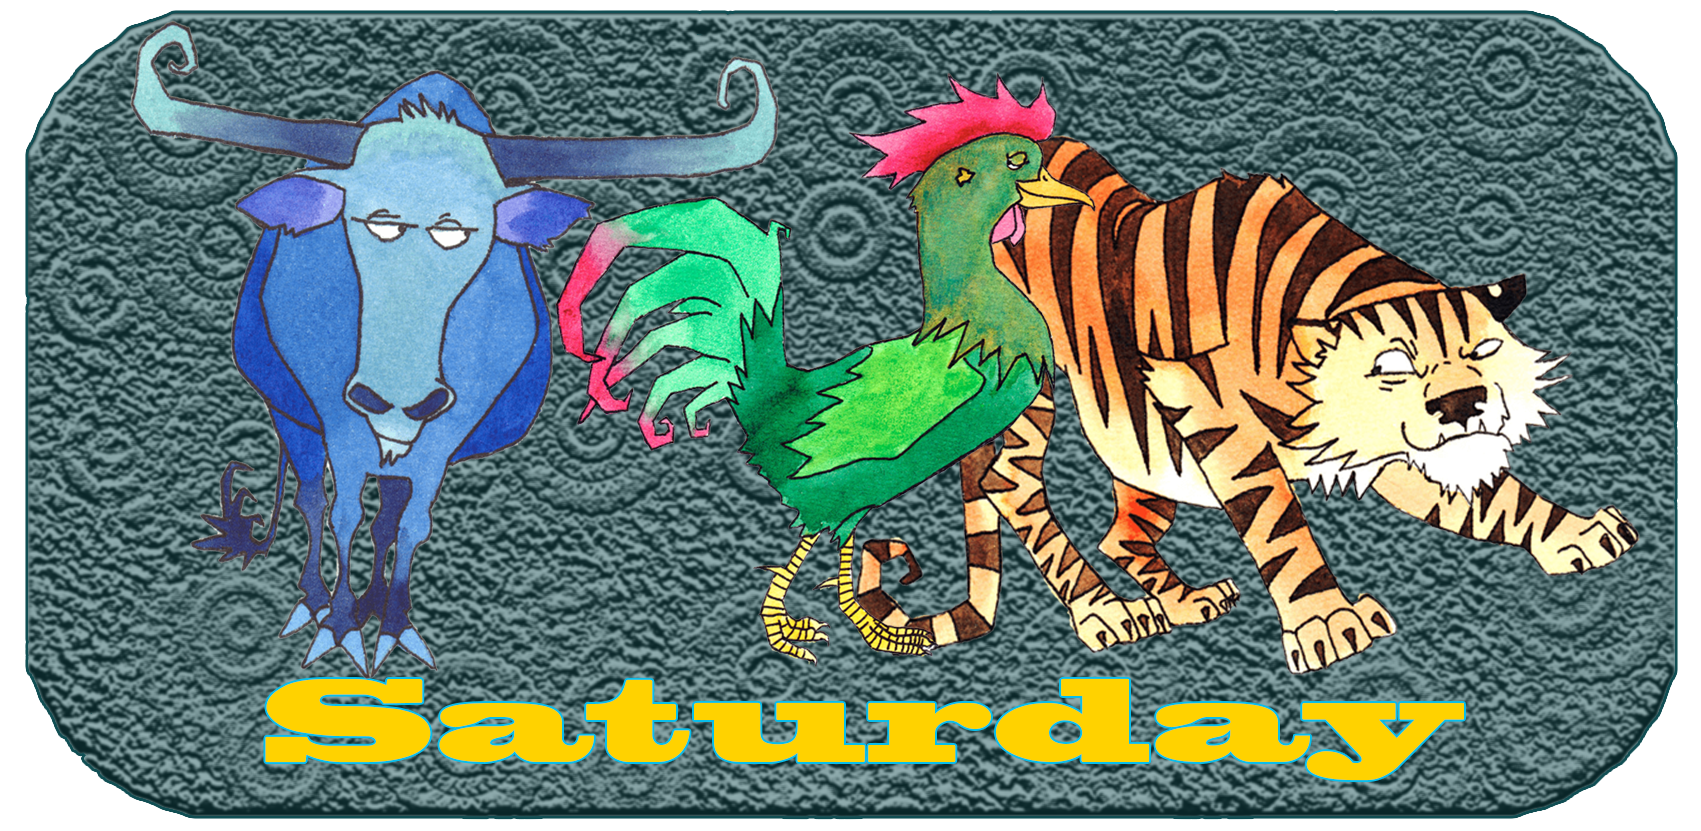 Chinese animal | Days of the week | Saturday | Ox, Tiger, Rooster